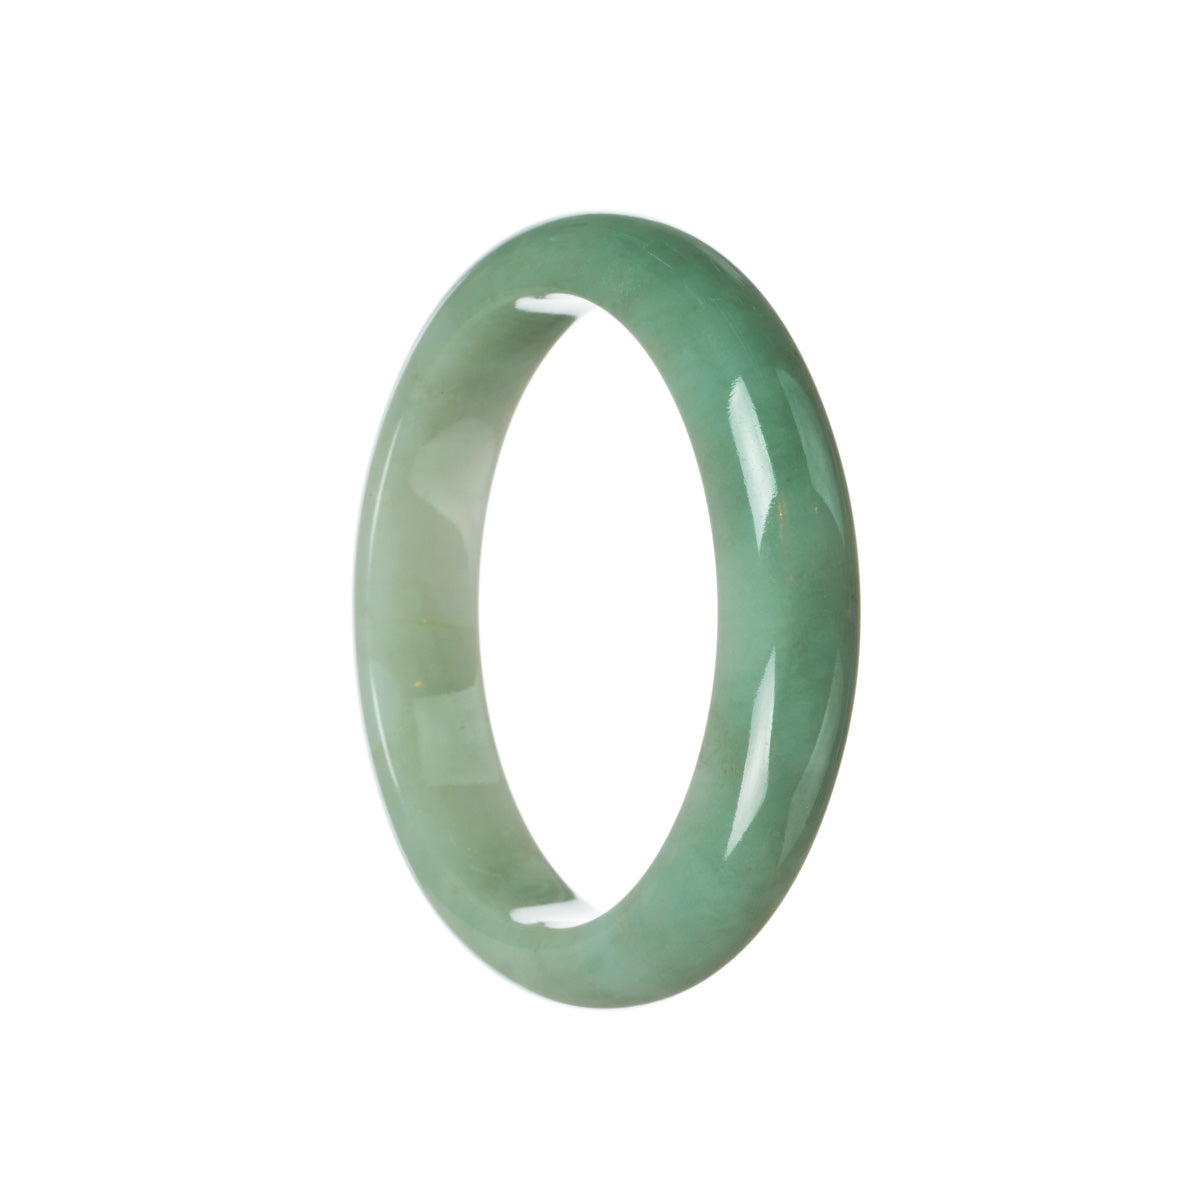 A natural, untreated green jade bangle bracelet with a semi-round shape, measuring 59mm in size. Perfect for adding a touch of traditional elegance to your style.